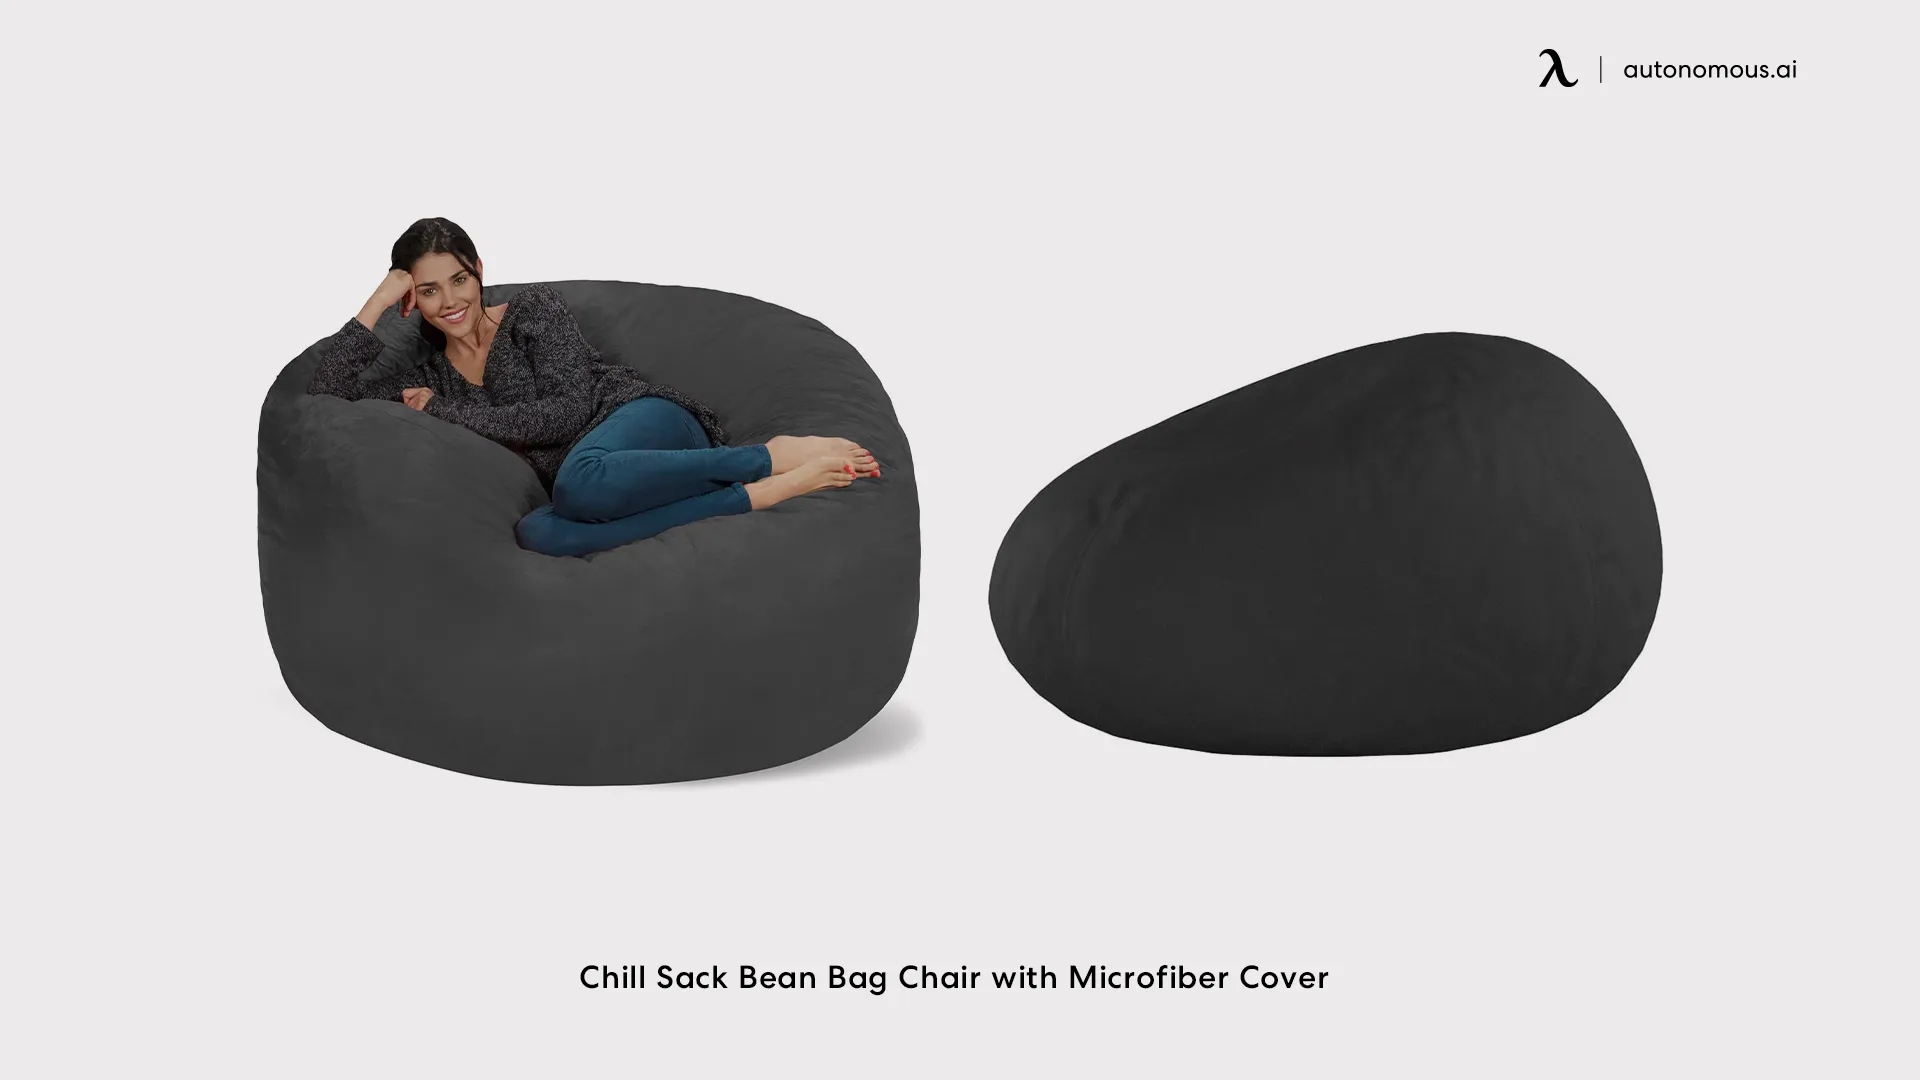 Chill Sack Bean Bag Chair with Microfiber Cover